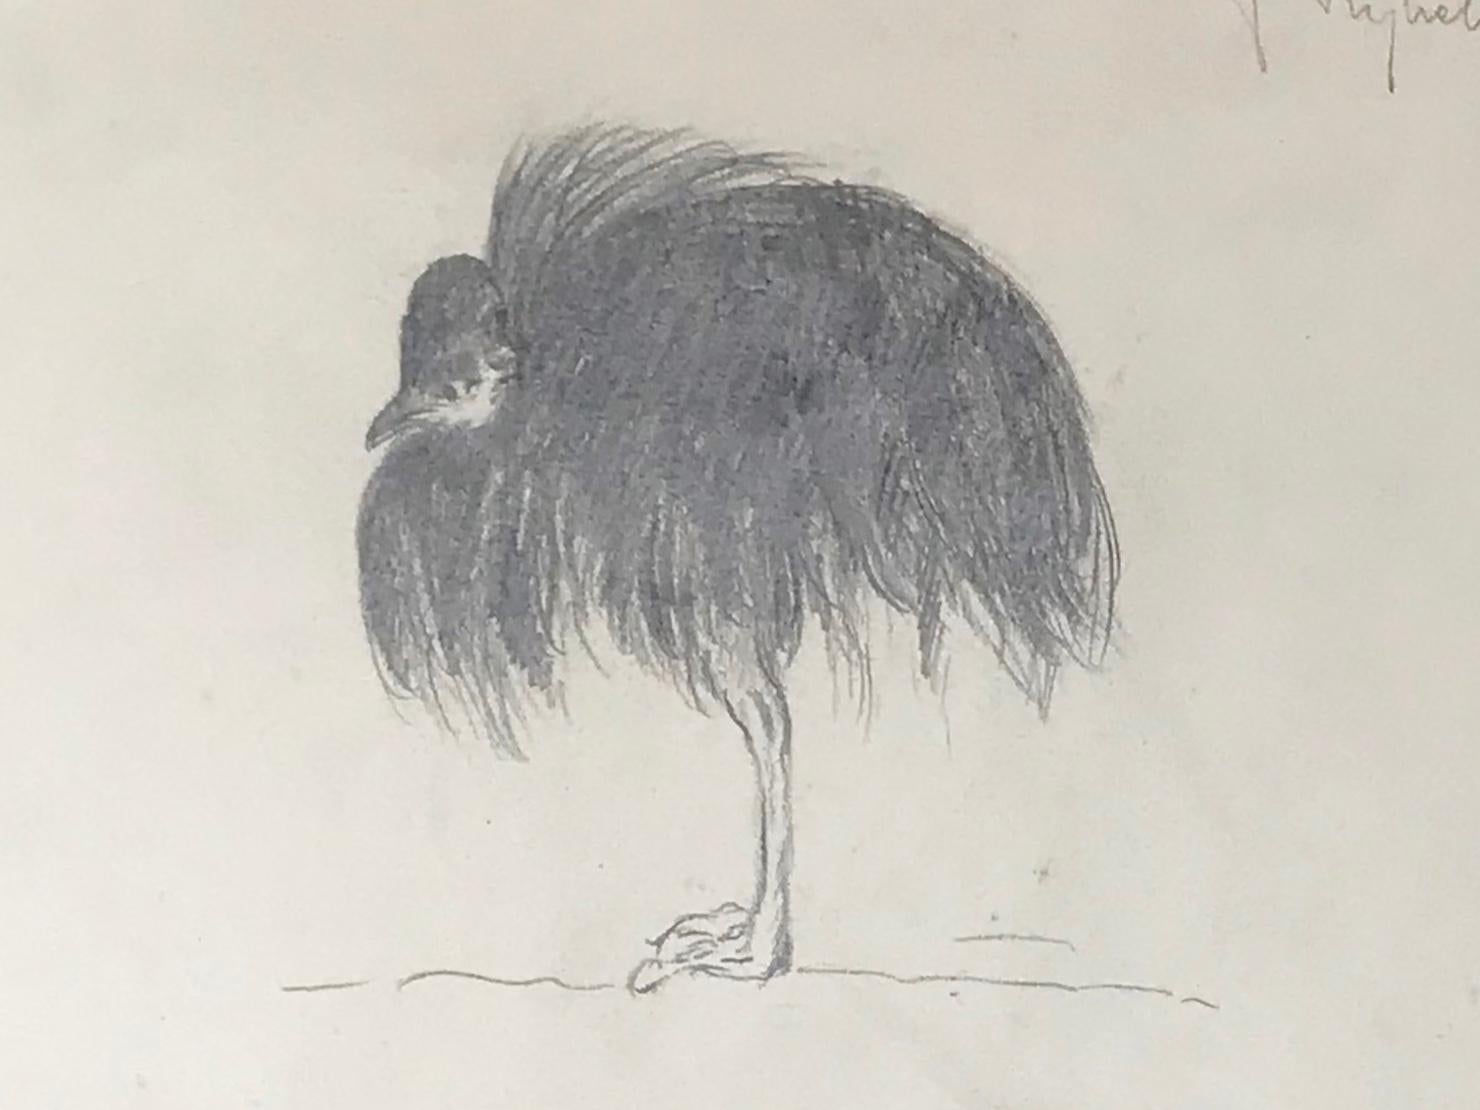 Black cassoary drawing, Guido Righetti, 1919. Original vintage Italian pencil drawings/sketches of a black cassoary in various poses from a series undertaken by Righetti for his sculptures in bronze including a boar, an elephant, a black cassoary, a